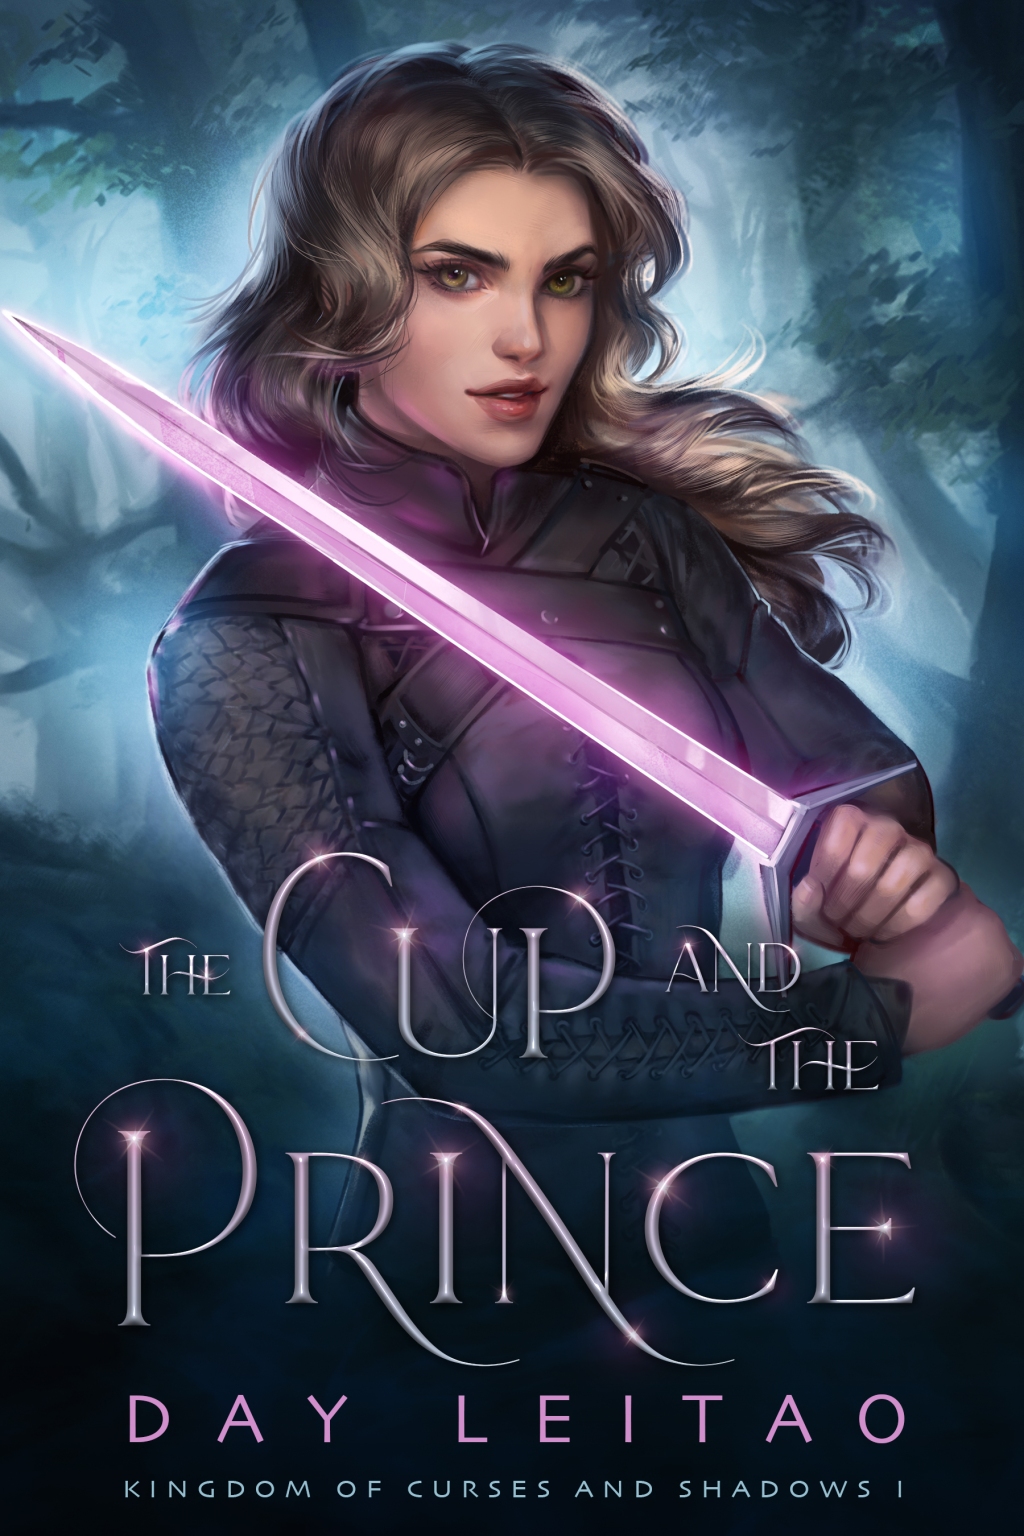 Blog Tour| The Cup and the Prince Review + Giveaway